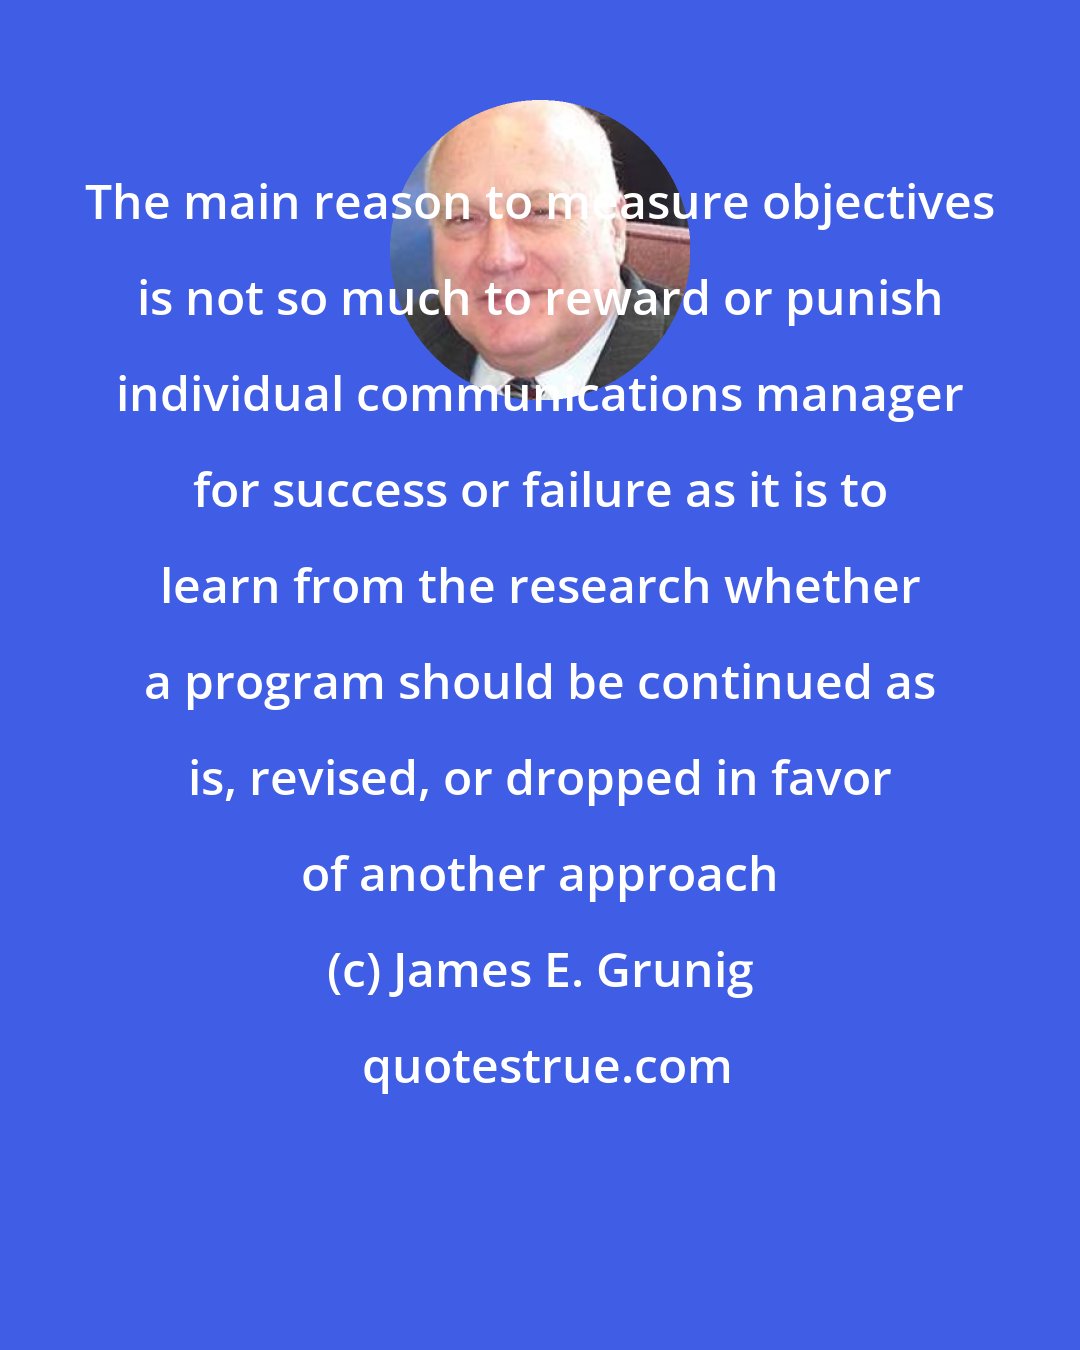 James E. Grunig: The main reason to measure objectives is not so much to reward or punish individual communications manager for success or failure as it is to learn from the research whether a program should be continued as is, revised, or dropped in favor of another approach